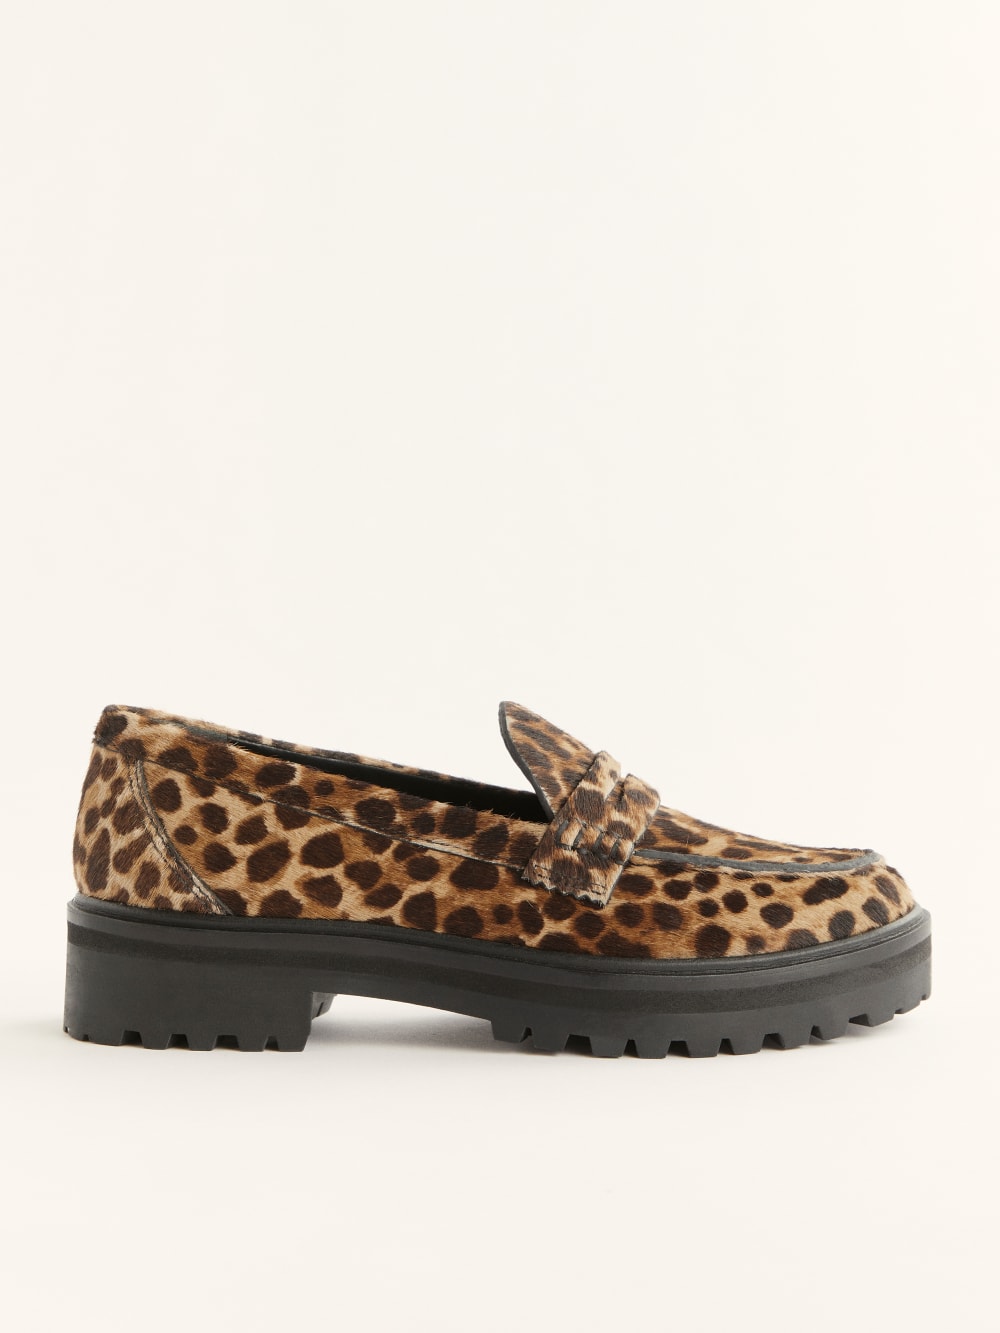 Reformation Agathea chunky leopard print loafer with Lug sole heel, round toe, low heel height.